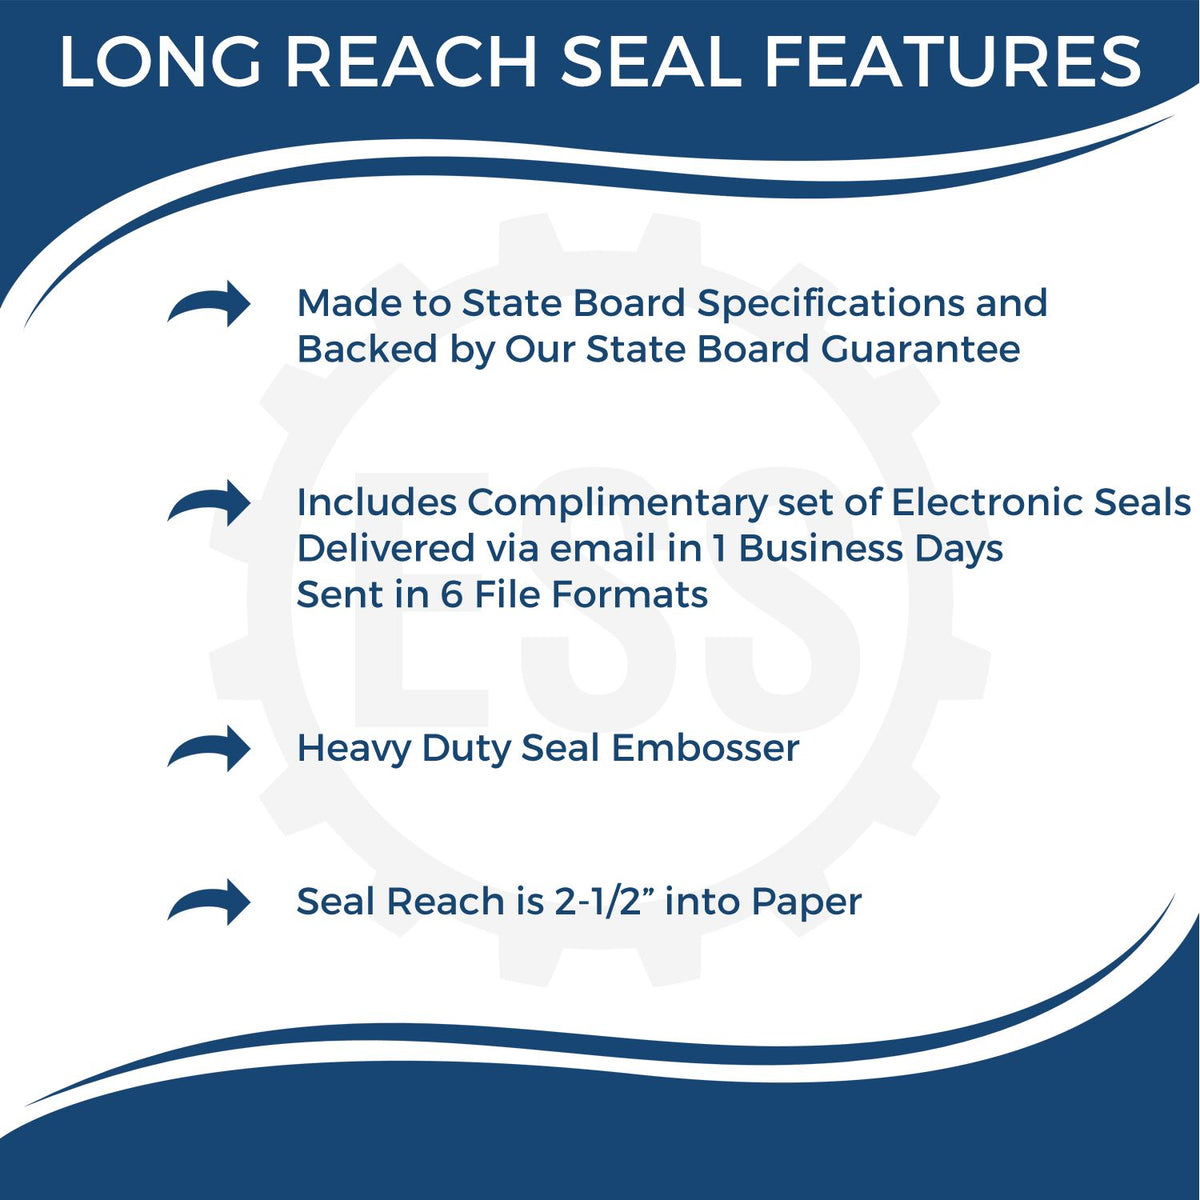 A picture of an infographic highlighting the selling points for the Long Reach Nevada Land Surveyor Seal